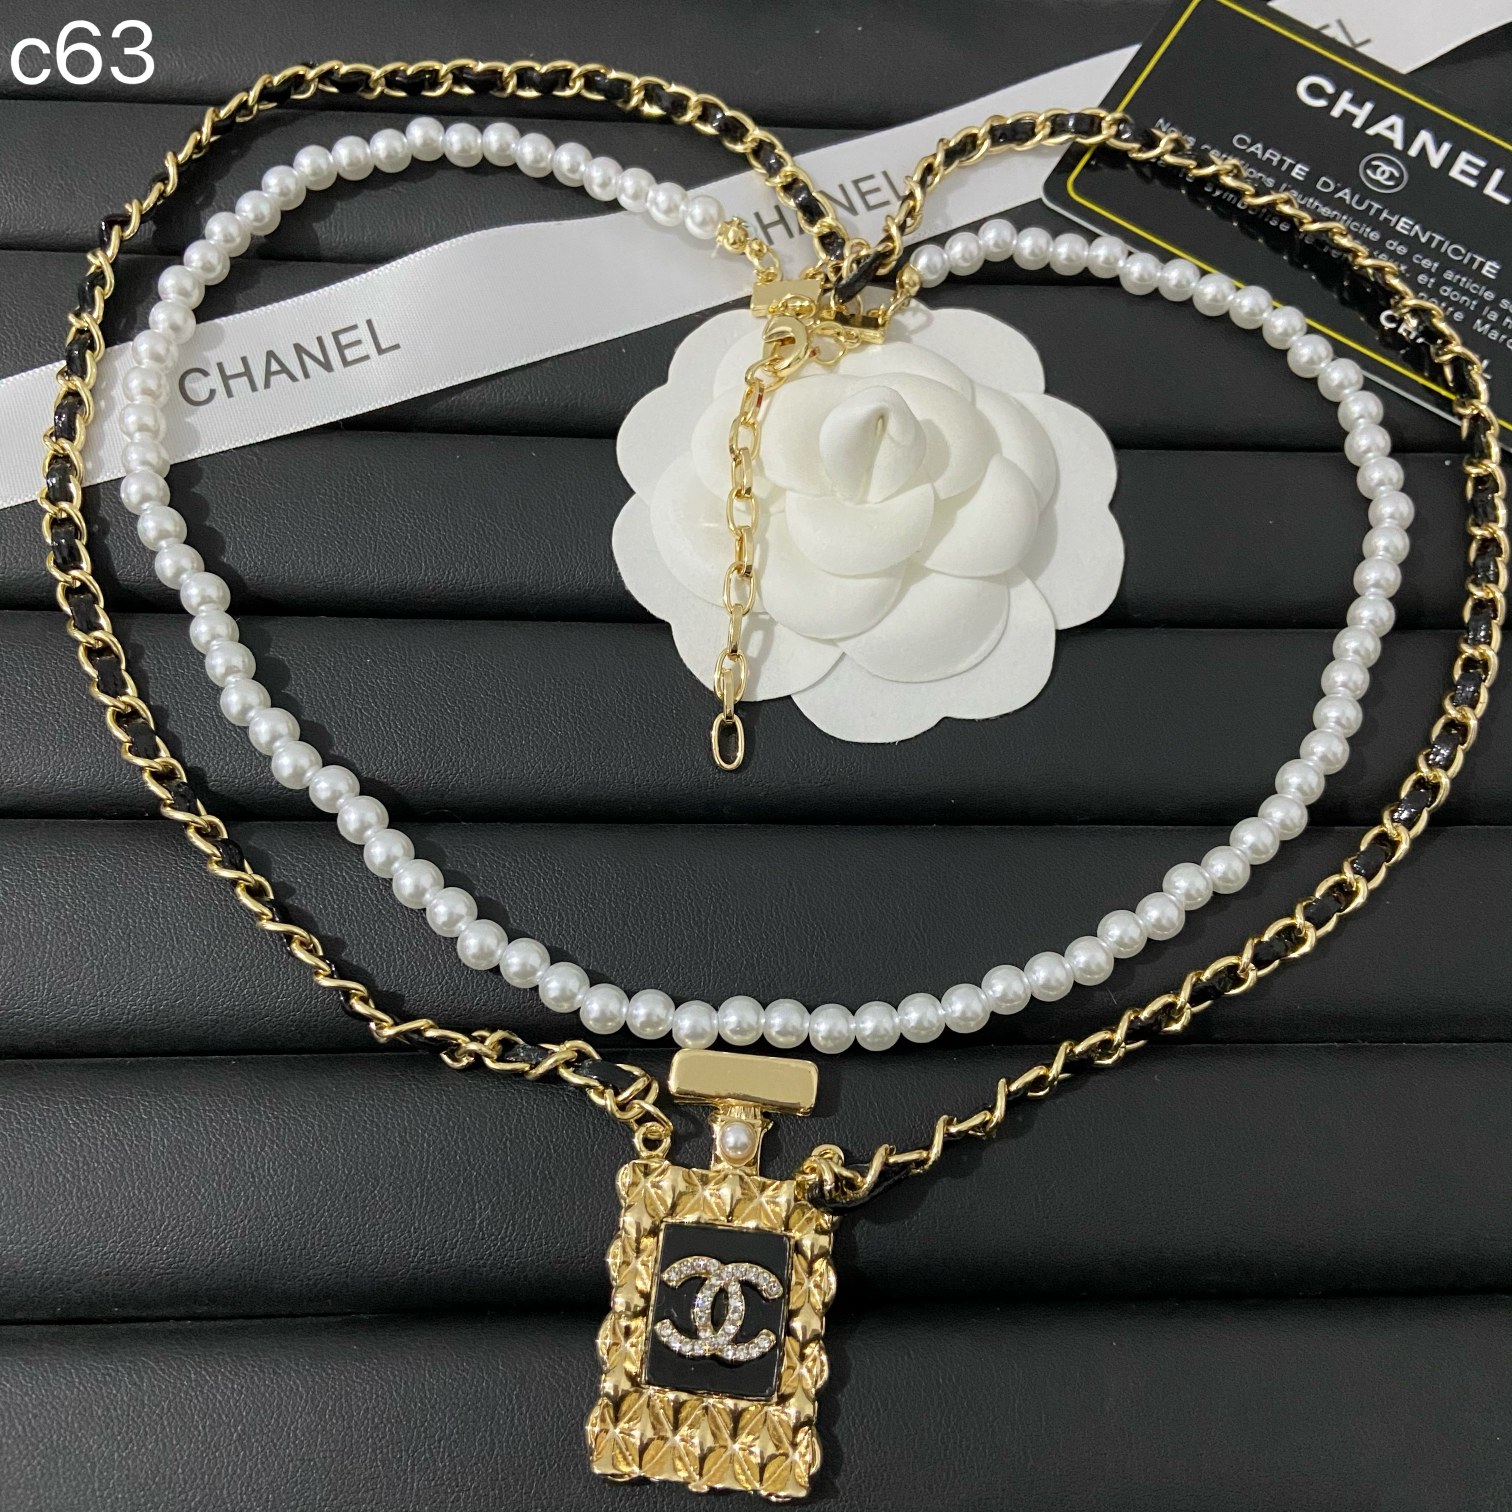 Chanel necklace 108821